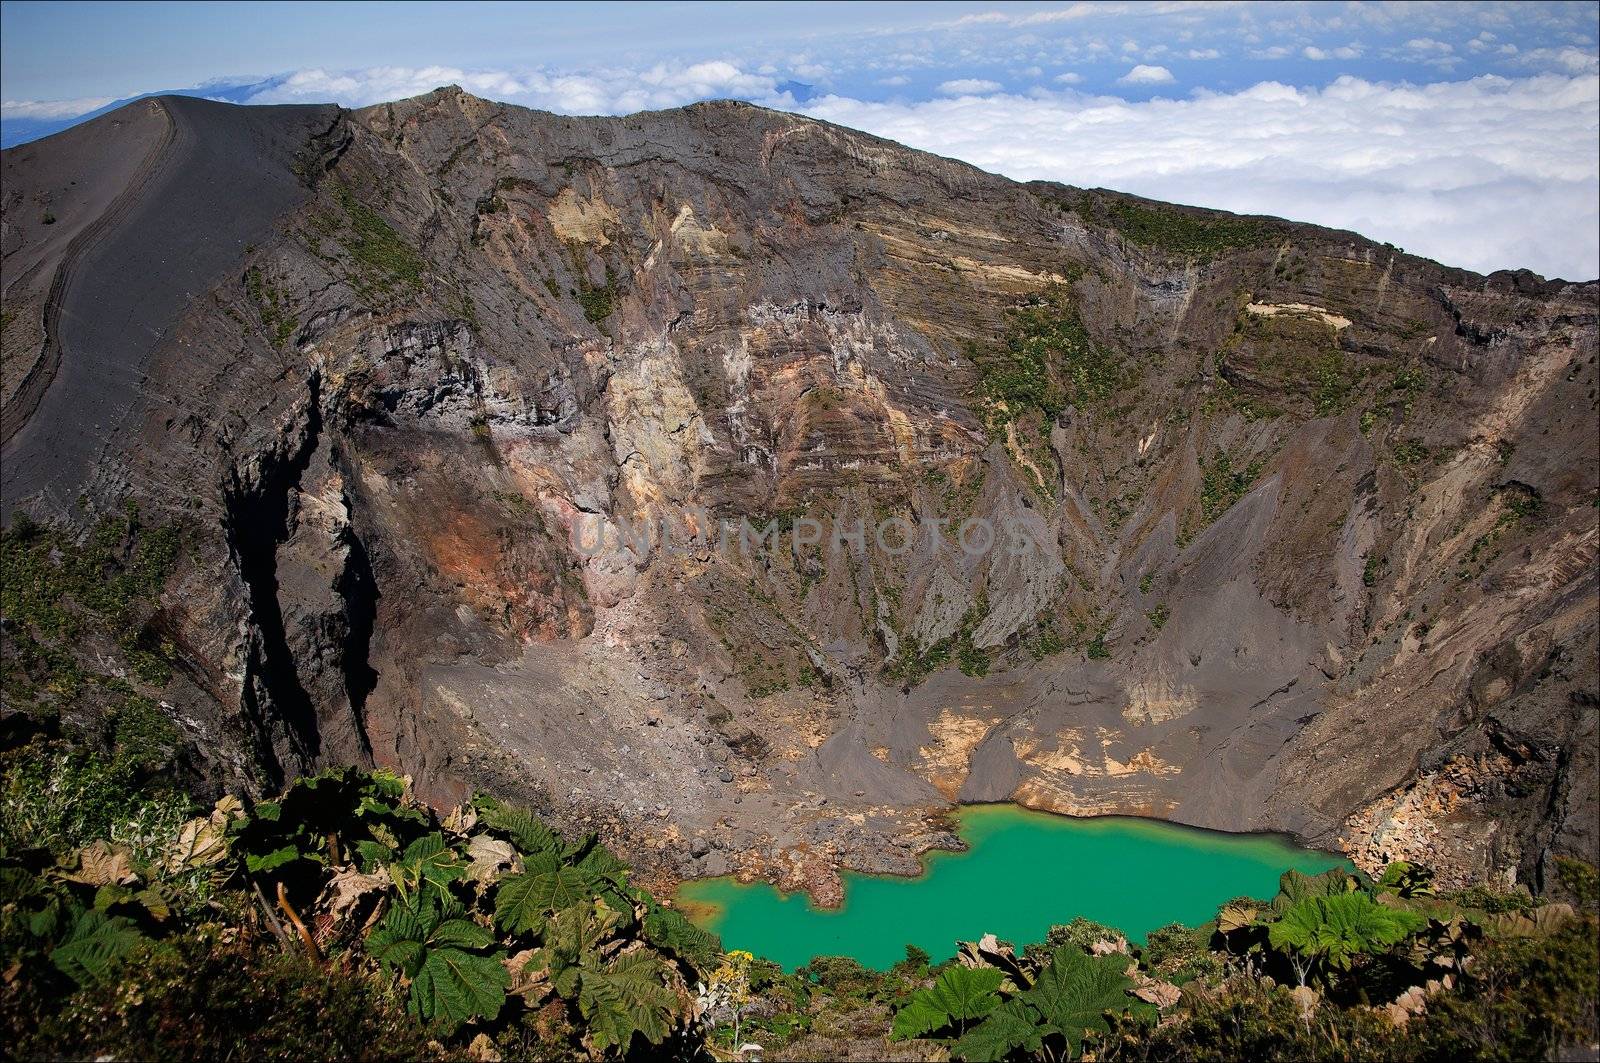 The Iraz� Volcano (Spanish: Volc�n Iraz�) is an active volcano in Costa Rica, situated in the Cordillera Central close to the city of Cartago.